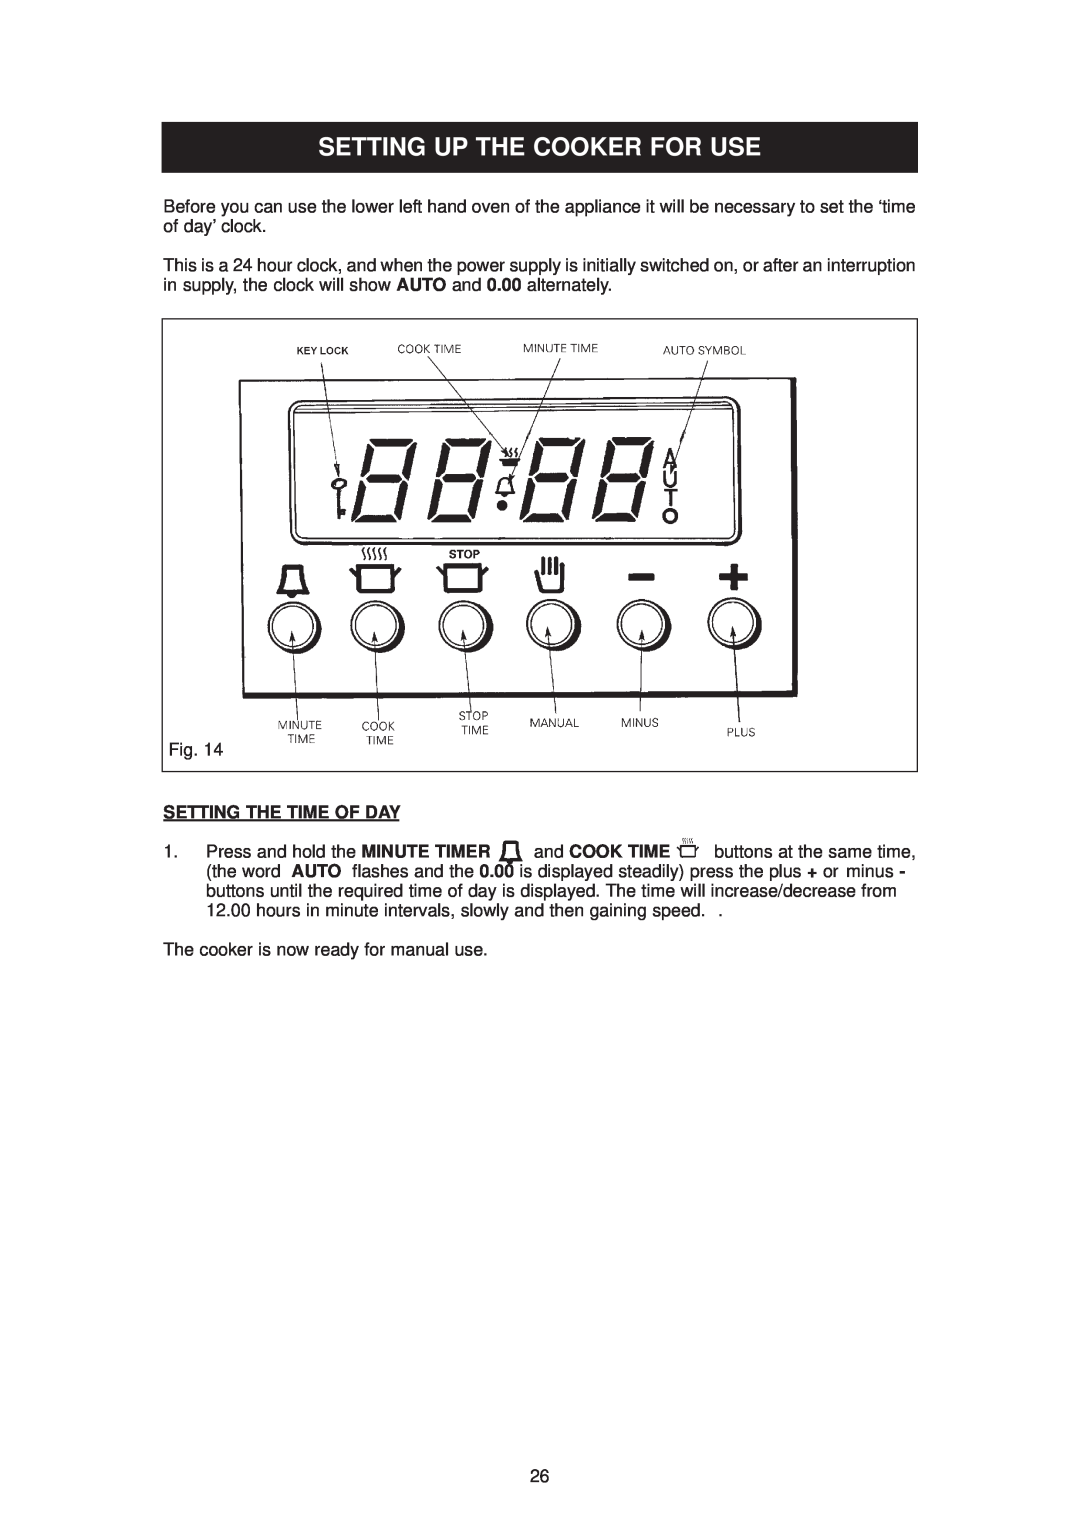 Aga Ranges DESN 512387 A owner manual Setting Up The Cooker For Use, Setting The Time Of Day 